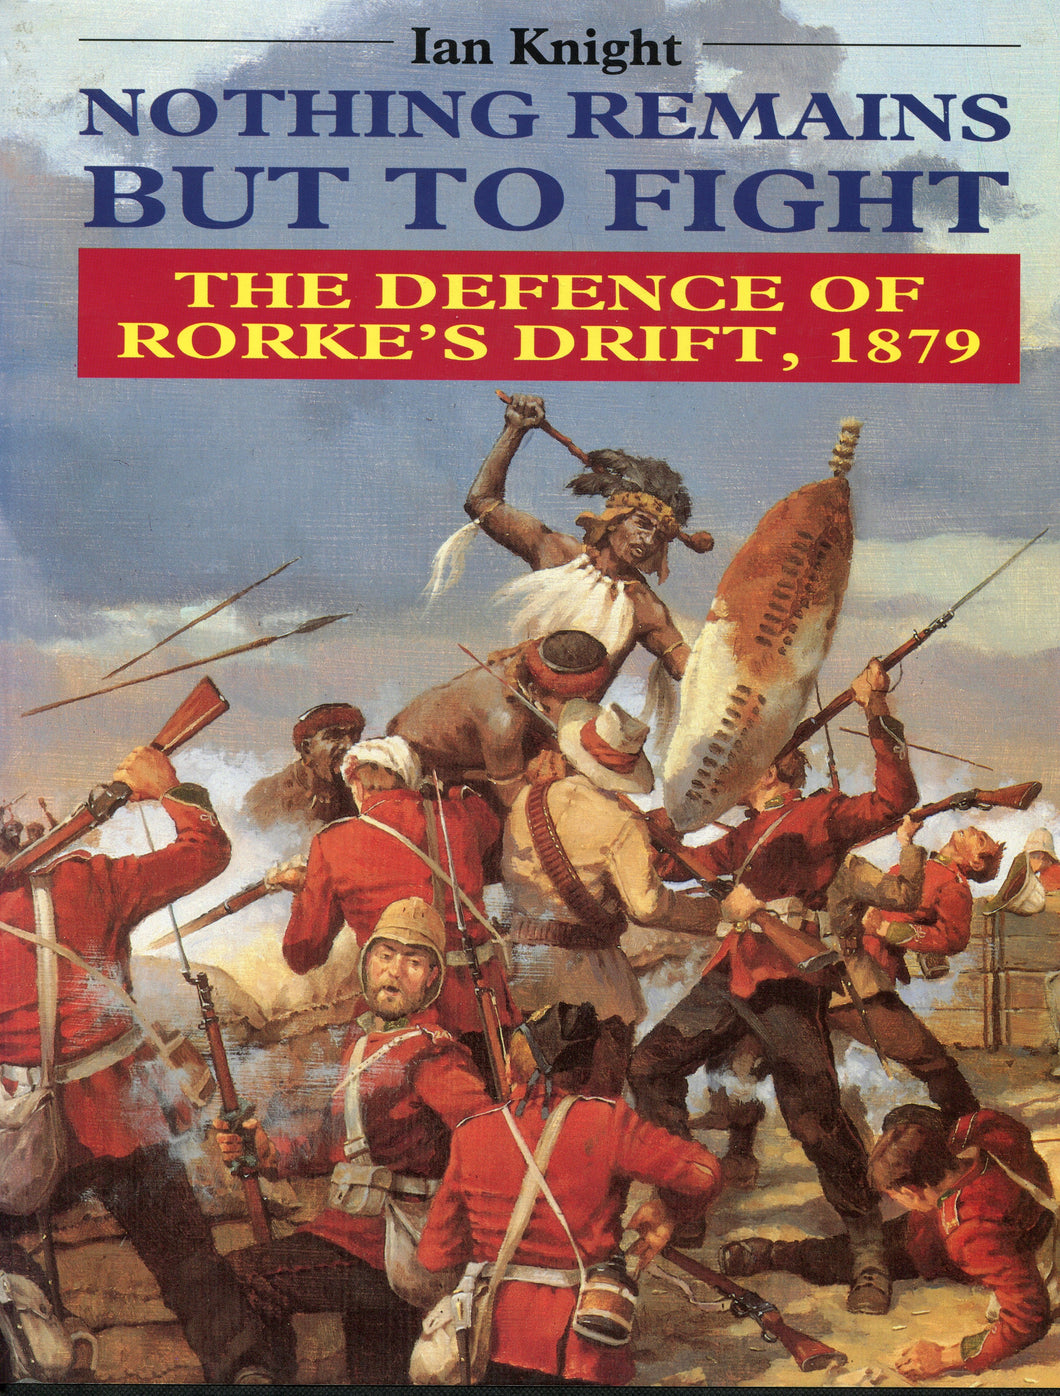 NOTHING REMAINS BUT TO FIGHT; THE DEFENCE OF RORKE'S DRIFT, by Ian Knight